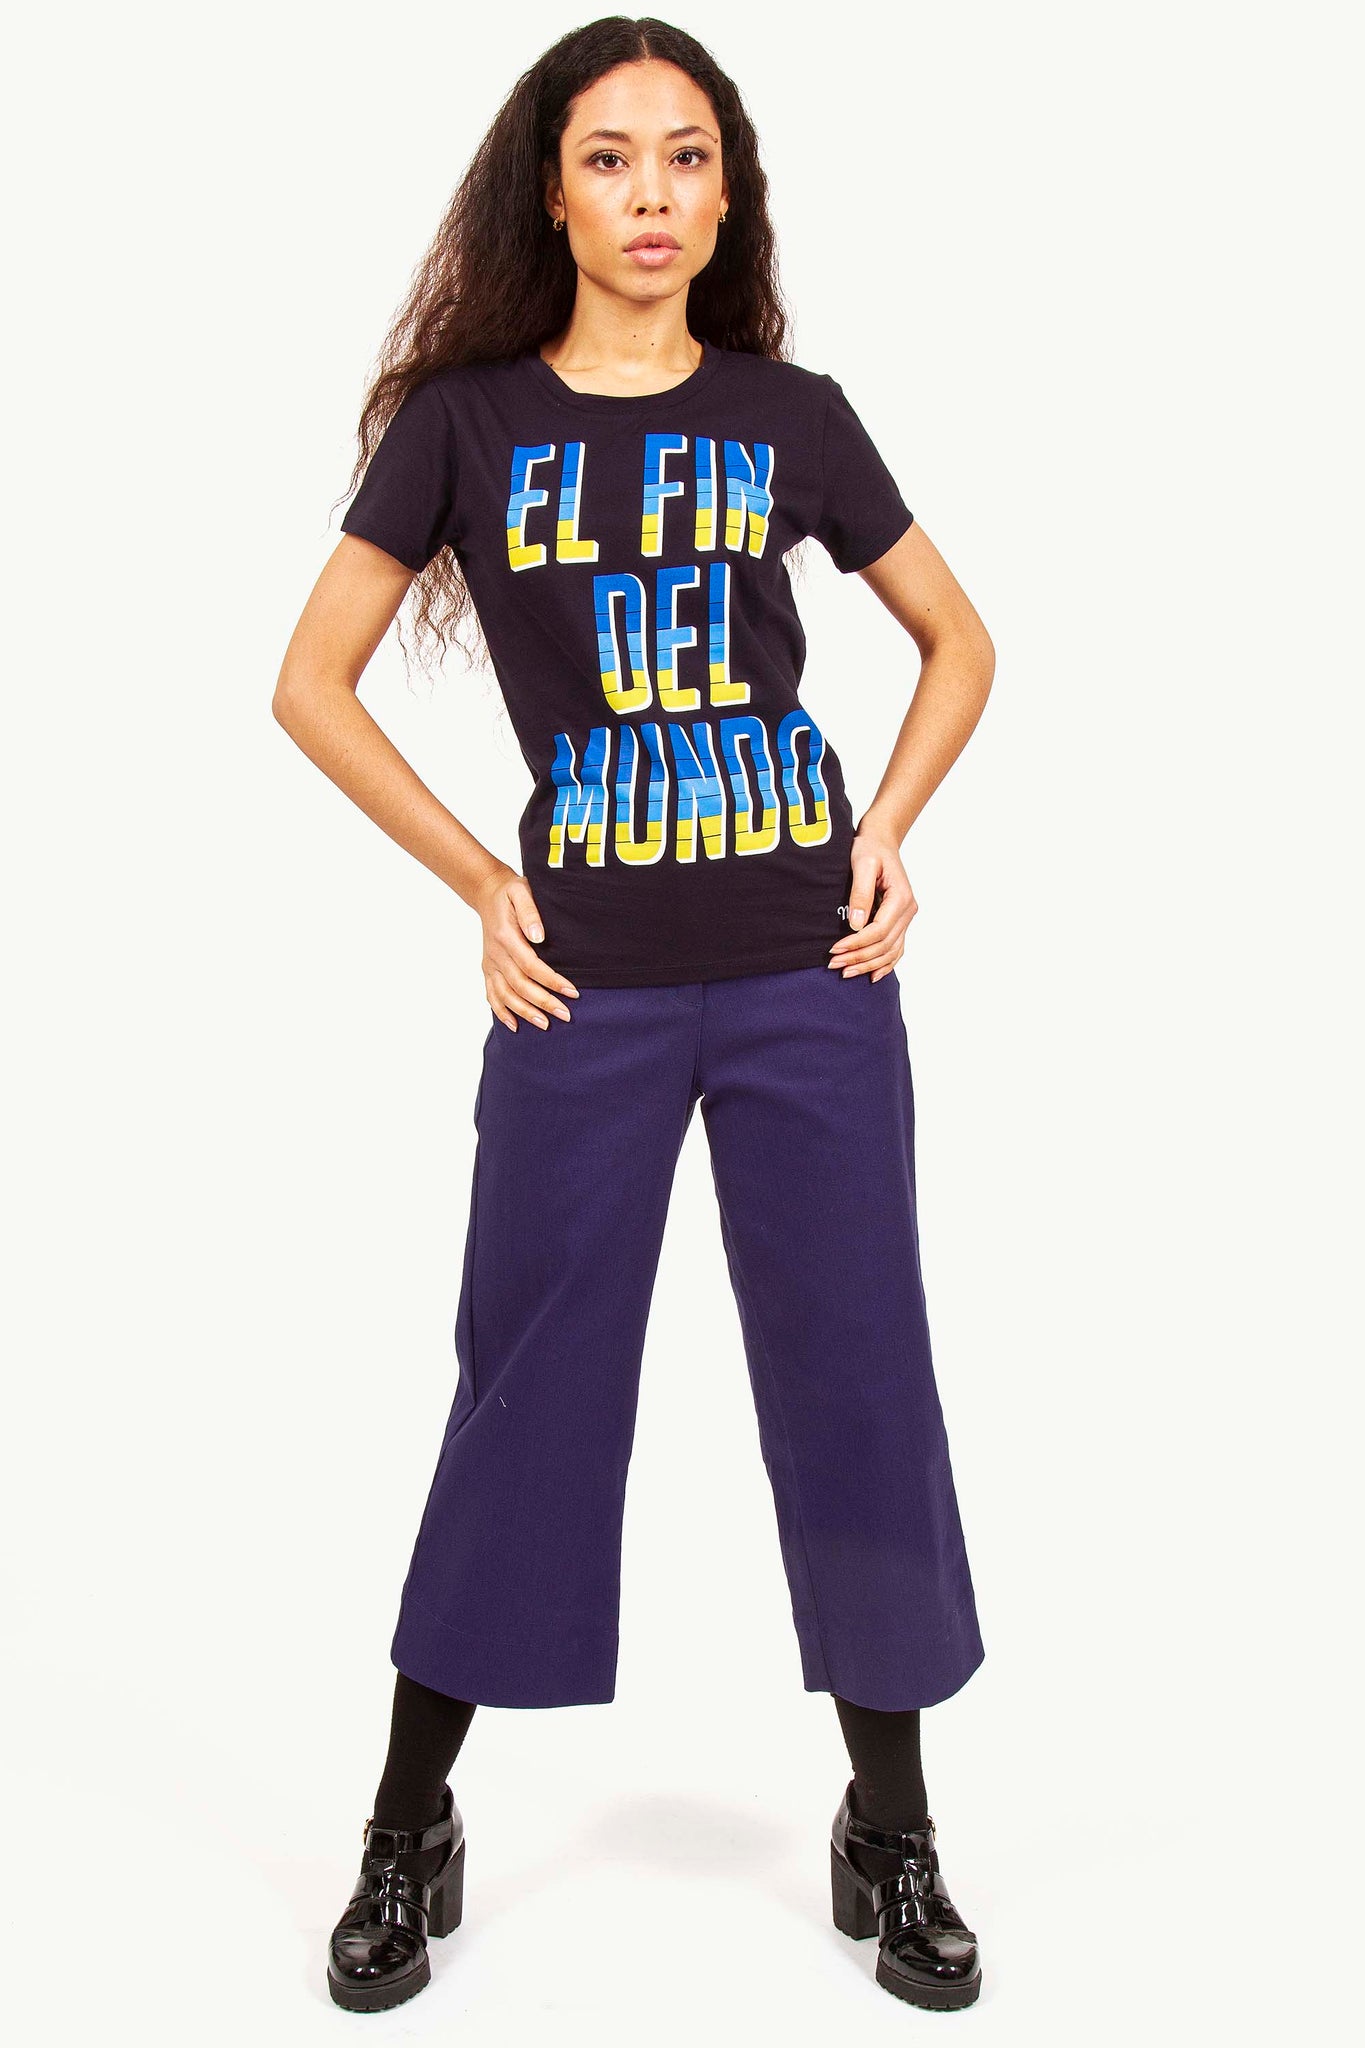 the end of the world el fin del mundo woman with committed message t-shirt responsible fashion in a changing world